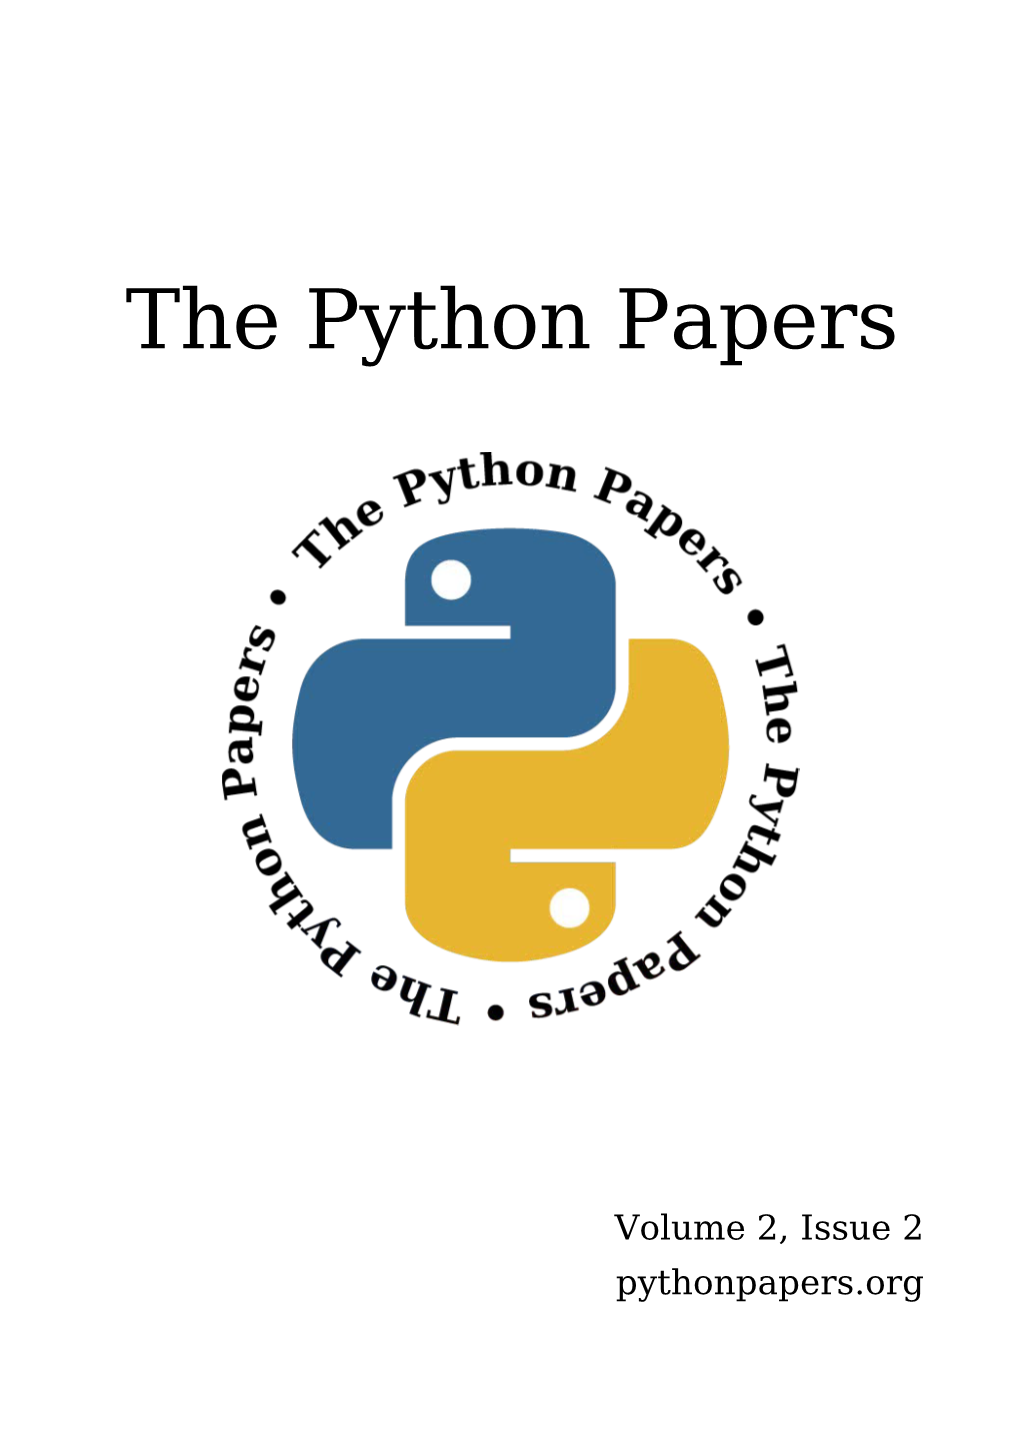 The Python Papers